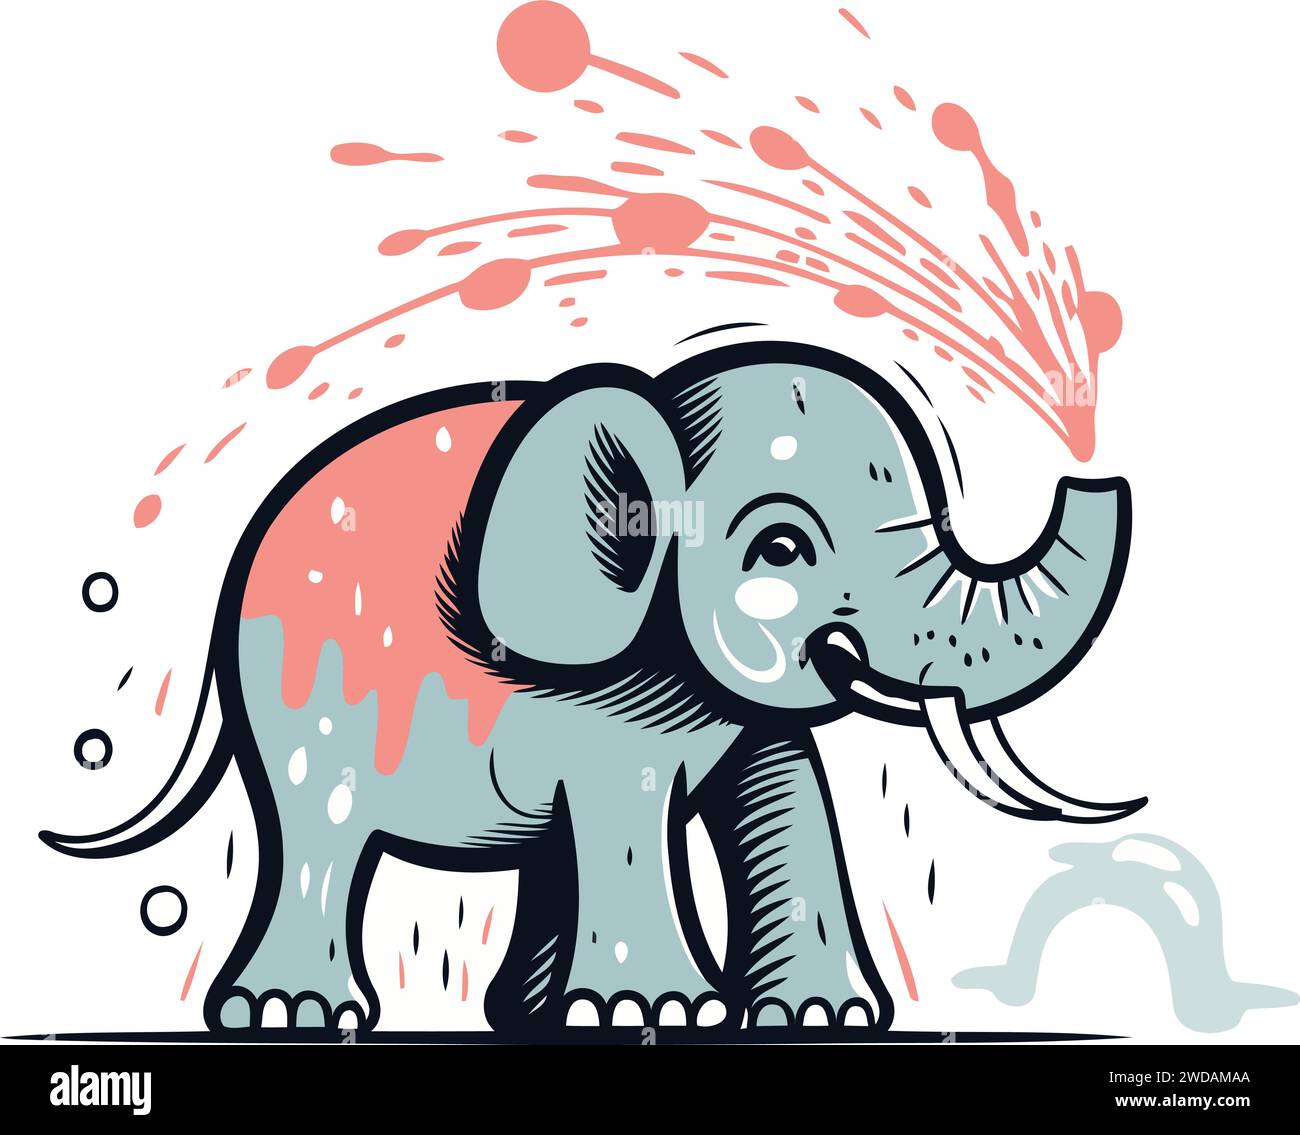 Elephant with splash of water. Vector illustration on white background. Stock Vector